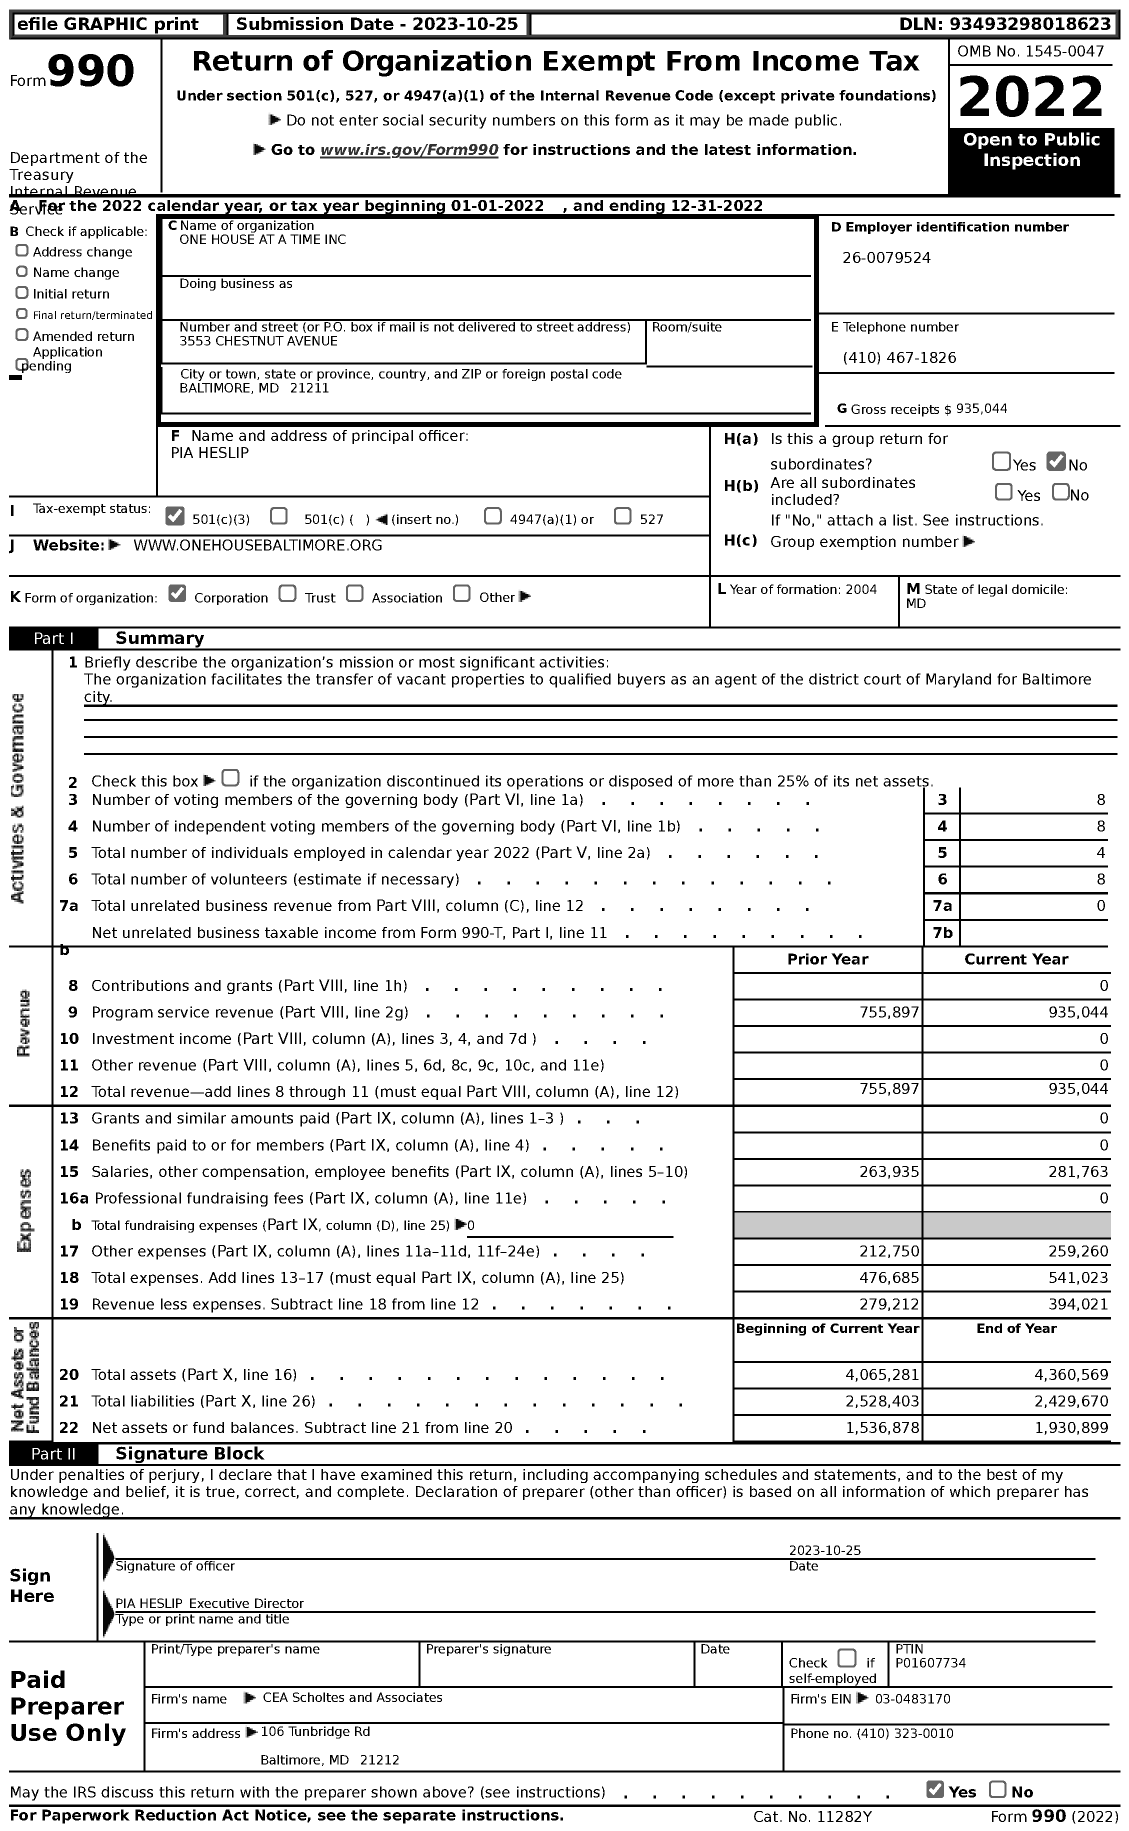 Image of first page of 2022 Form 990 for One House at a Time